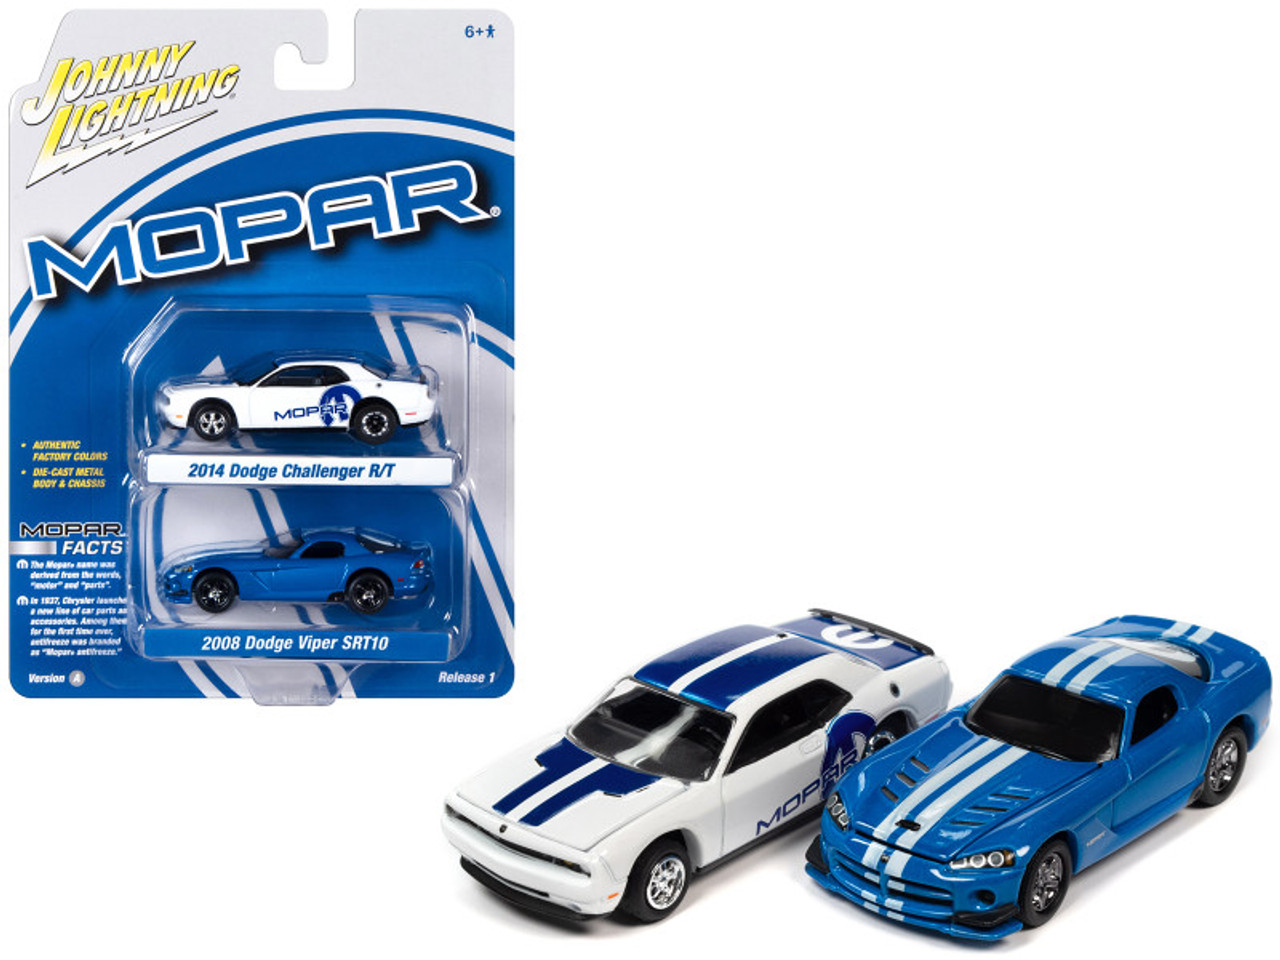 2014 Dodge Challenger R/T White with Blue Stripes and Graphics and 2008 Dodge Viper SRT10 Blue Metallic with White Stripes "MOPAR" Set of 2 Cars "2-Packs" 2023 Release 1 1/64 Diecast Model Cars by Johnny Lightning